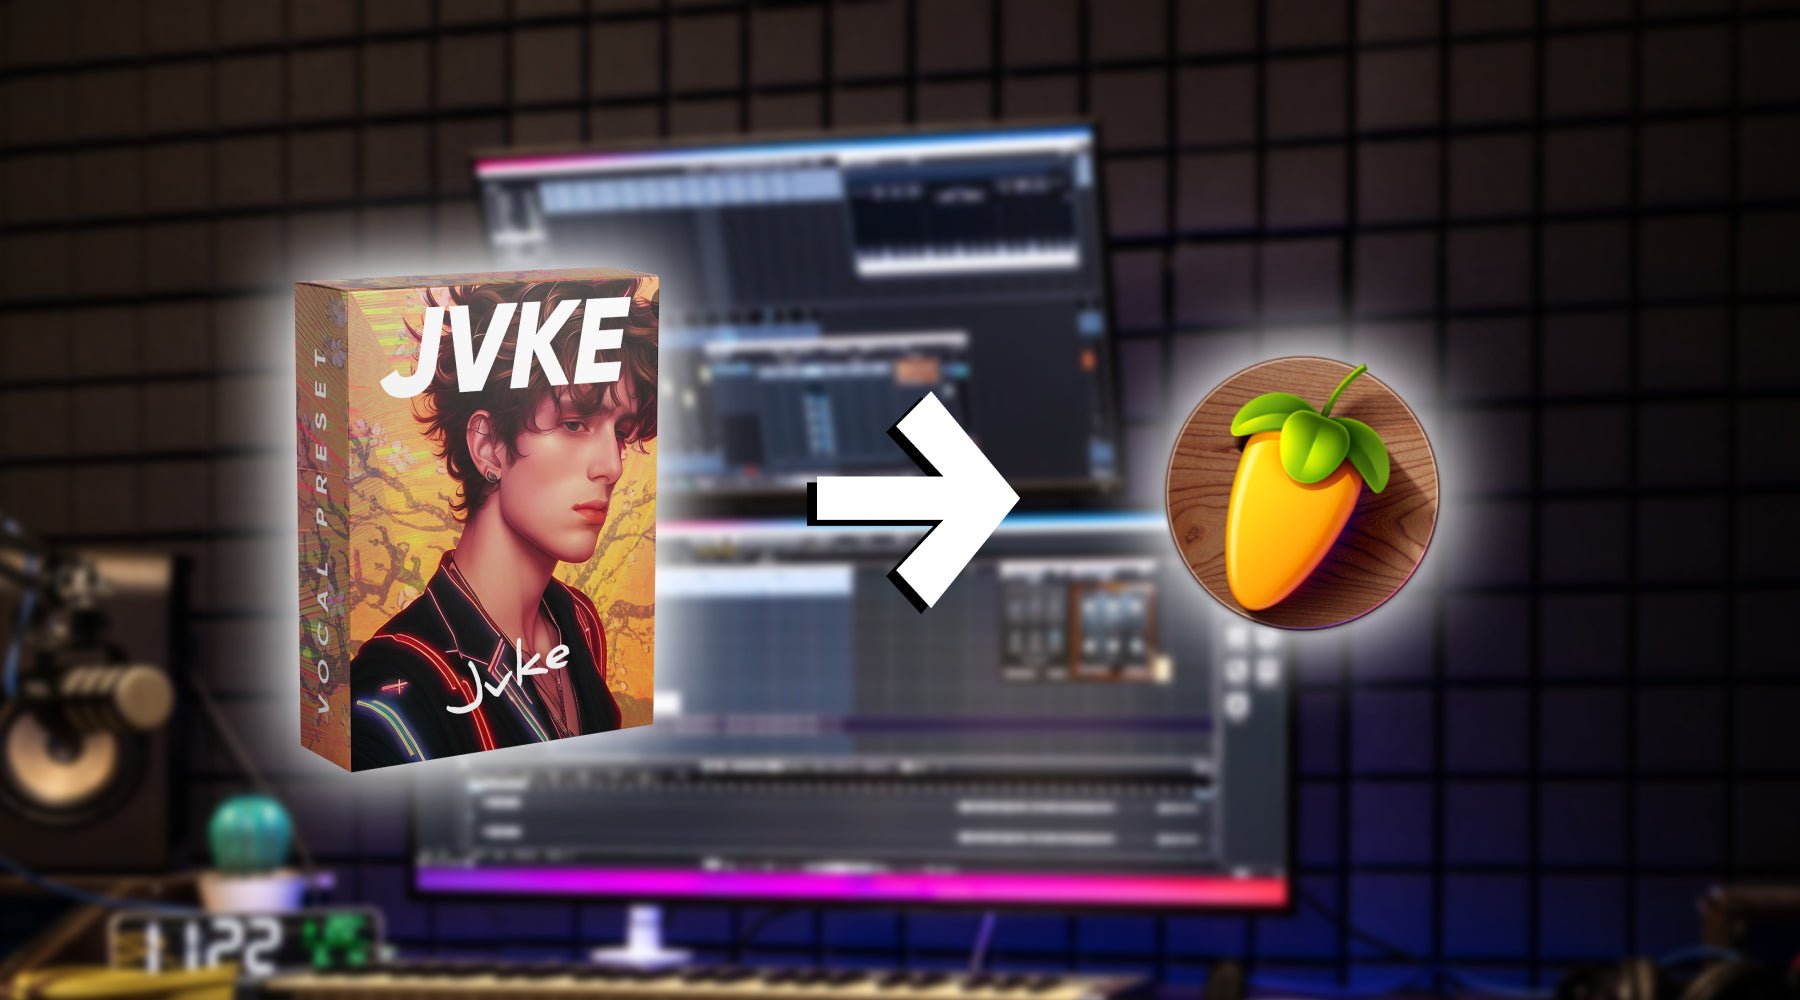 FL Studio Tutorial: How to Download and Install the Free Trial